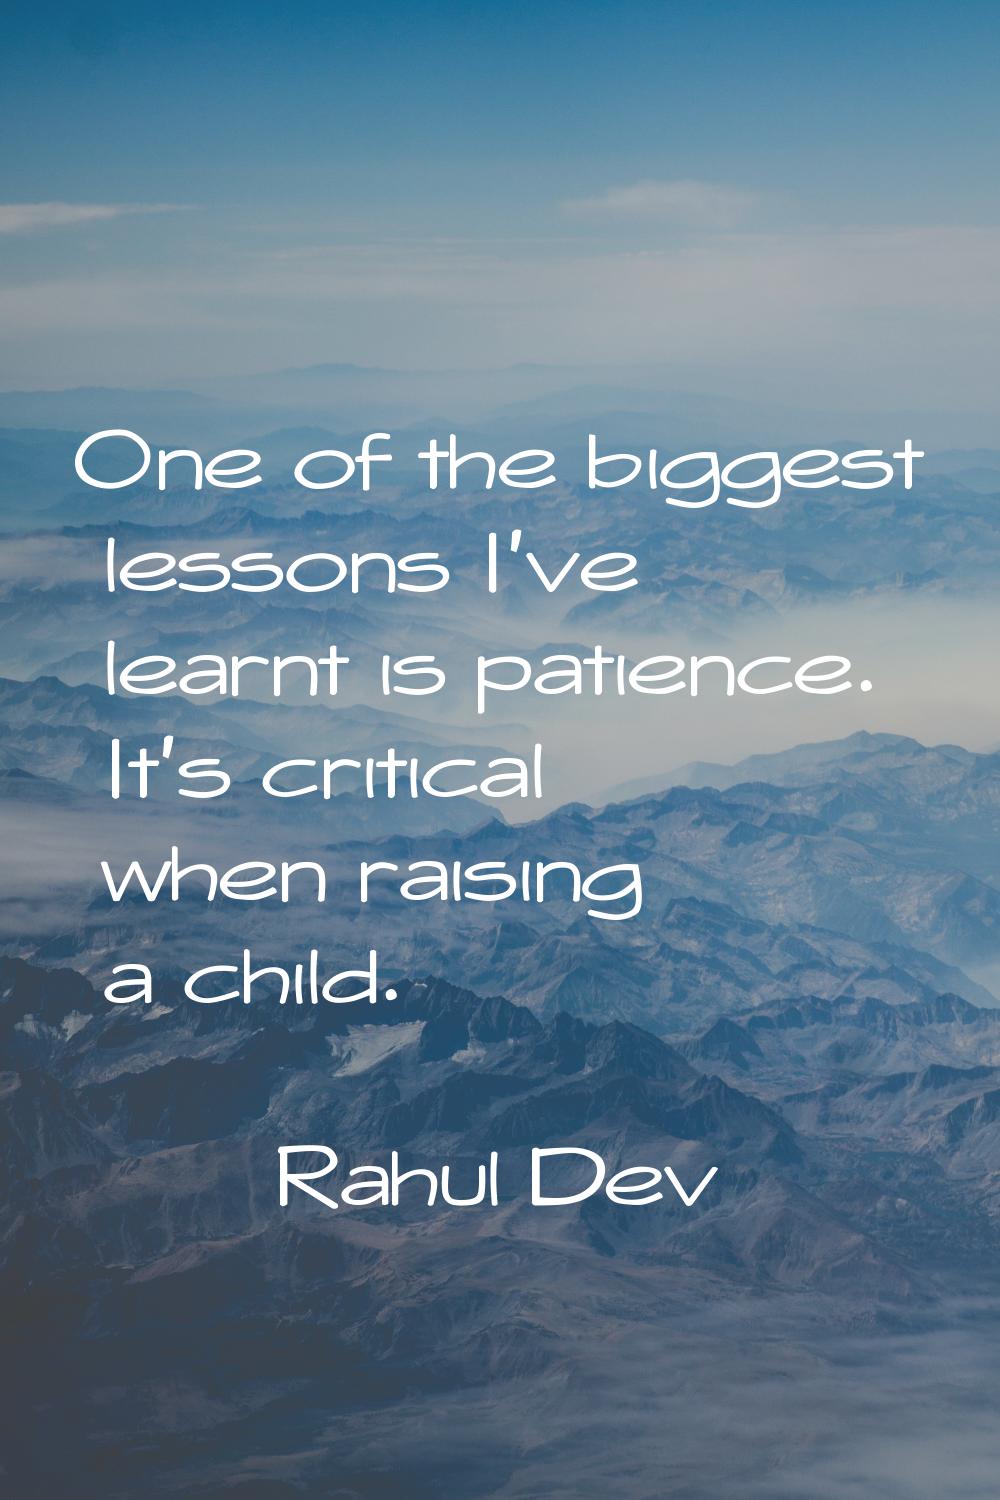 One of the biggest lessons I've learnt is patience. It's critical when raising a child.